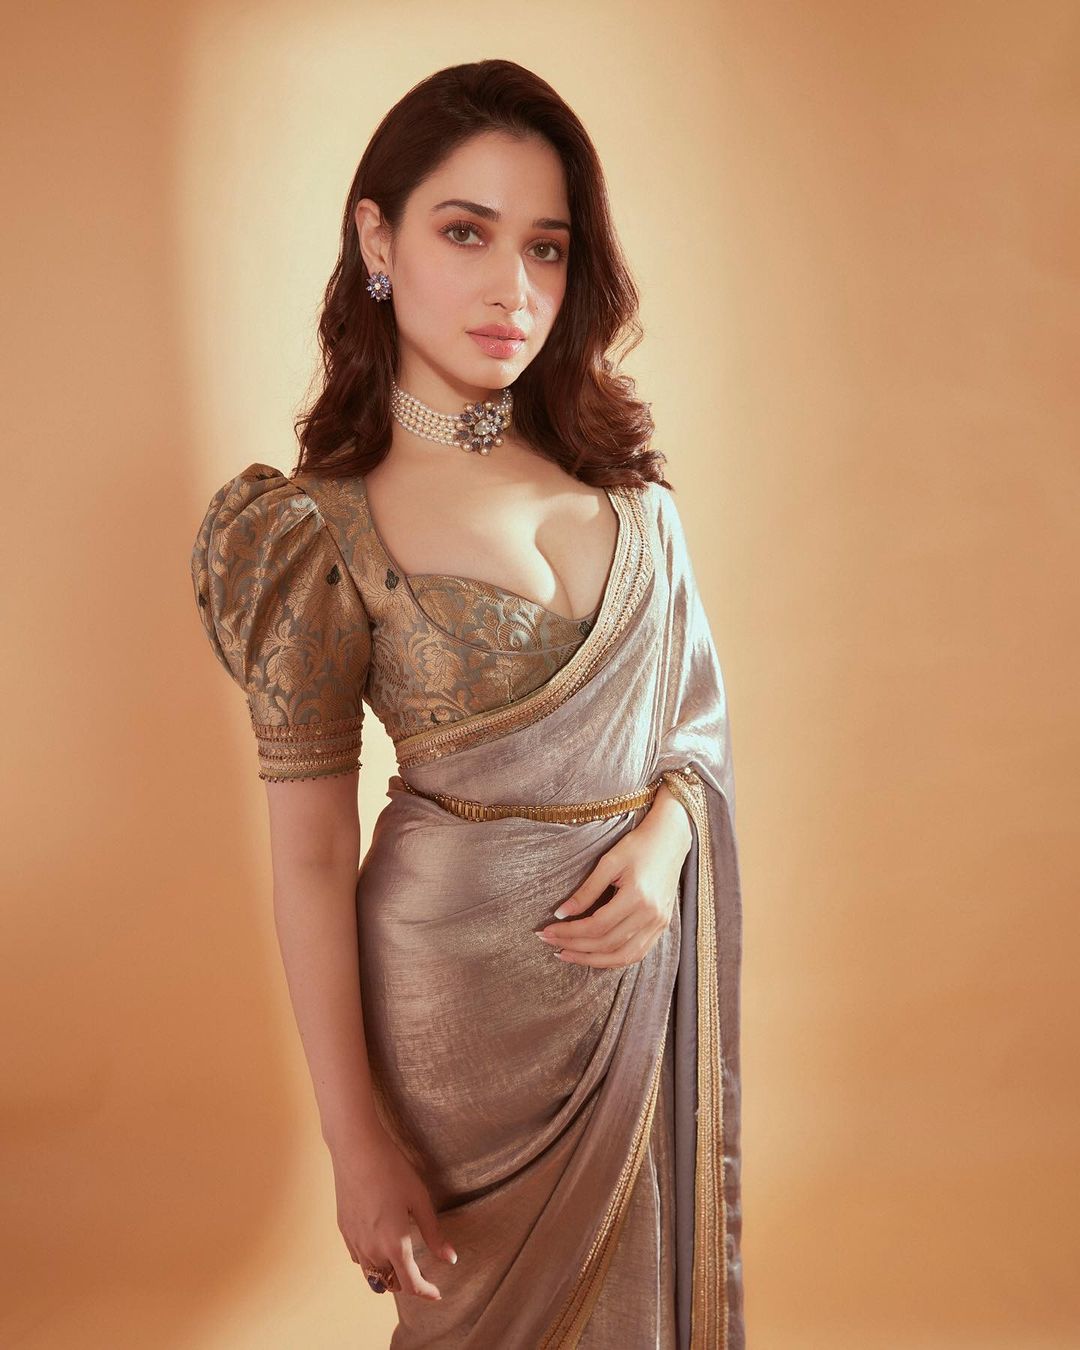 Tamanna Real Sex Videos Hd - Did you notice Tamannaah Bhatia's sexy brocade blouse? Check out her look  if you love cocktail-ready drapes | PINKVILLA